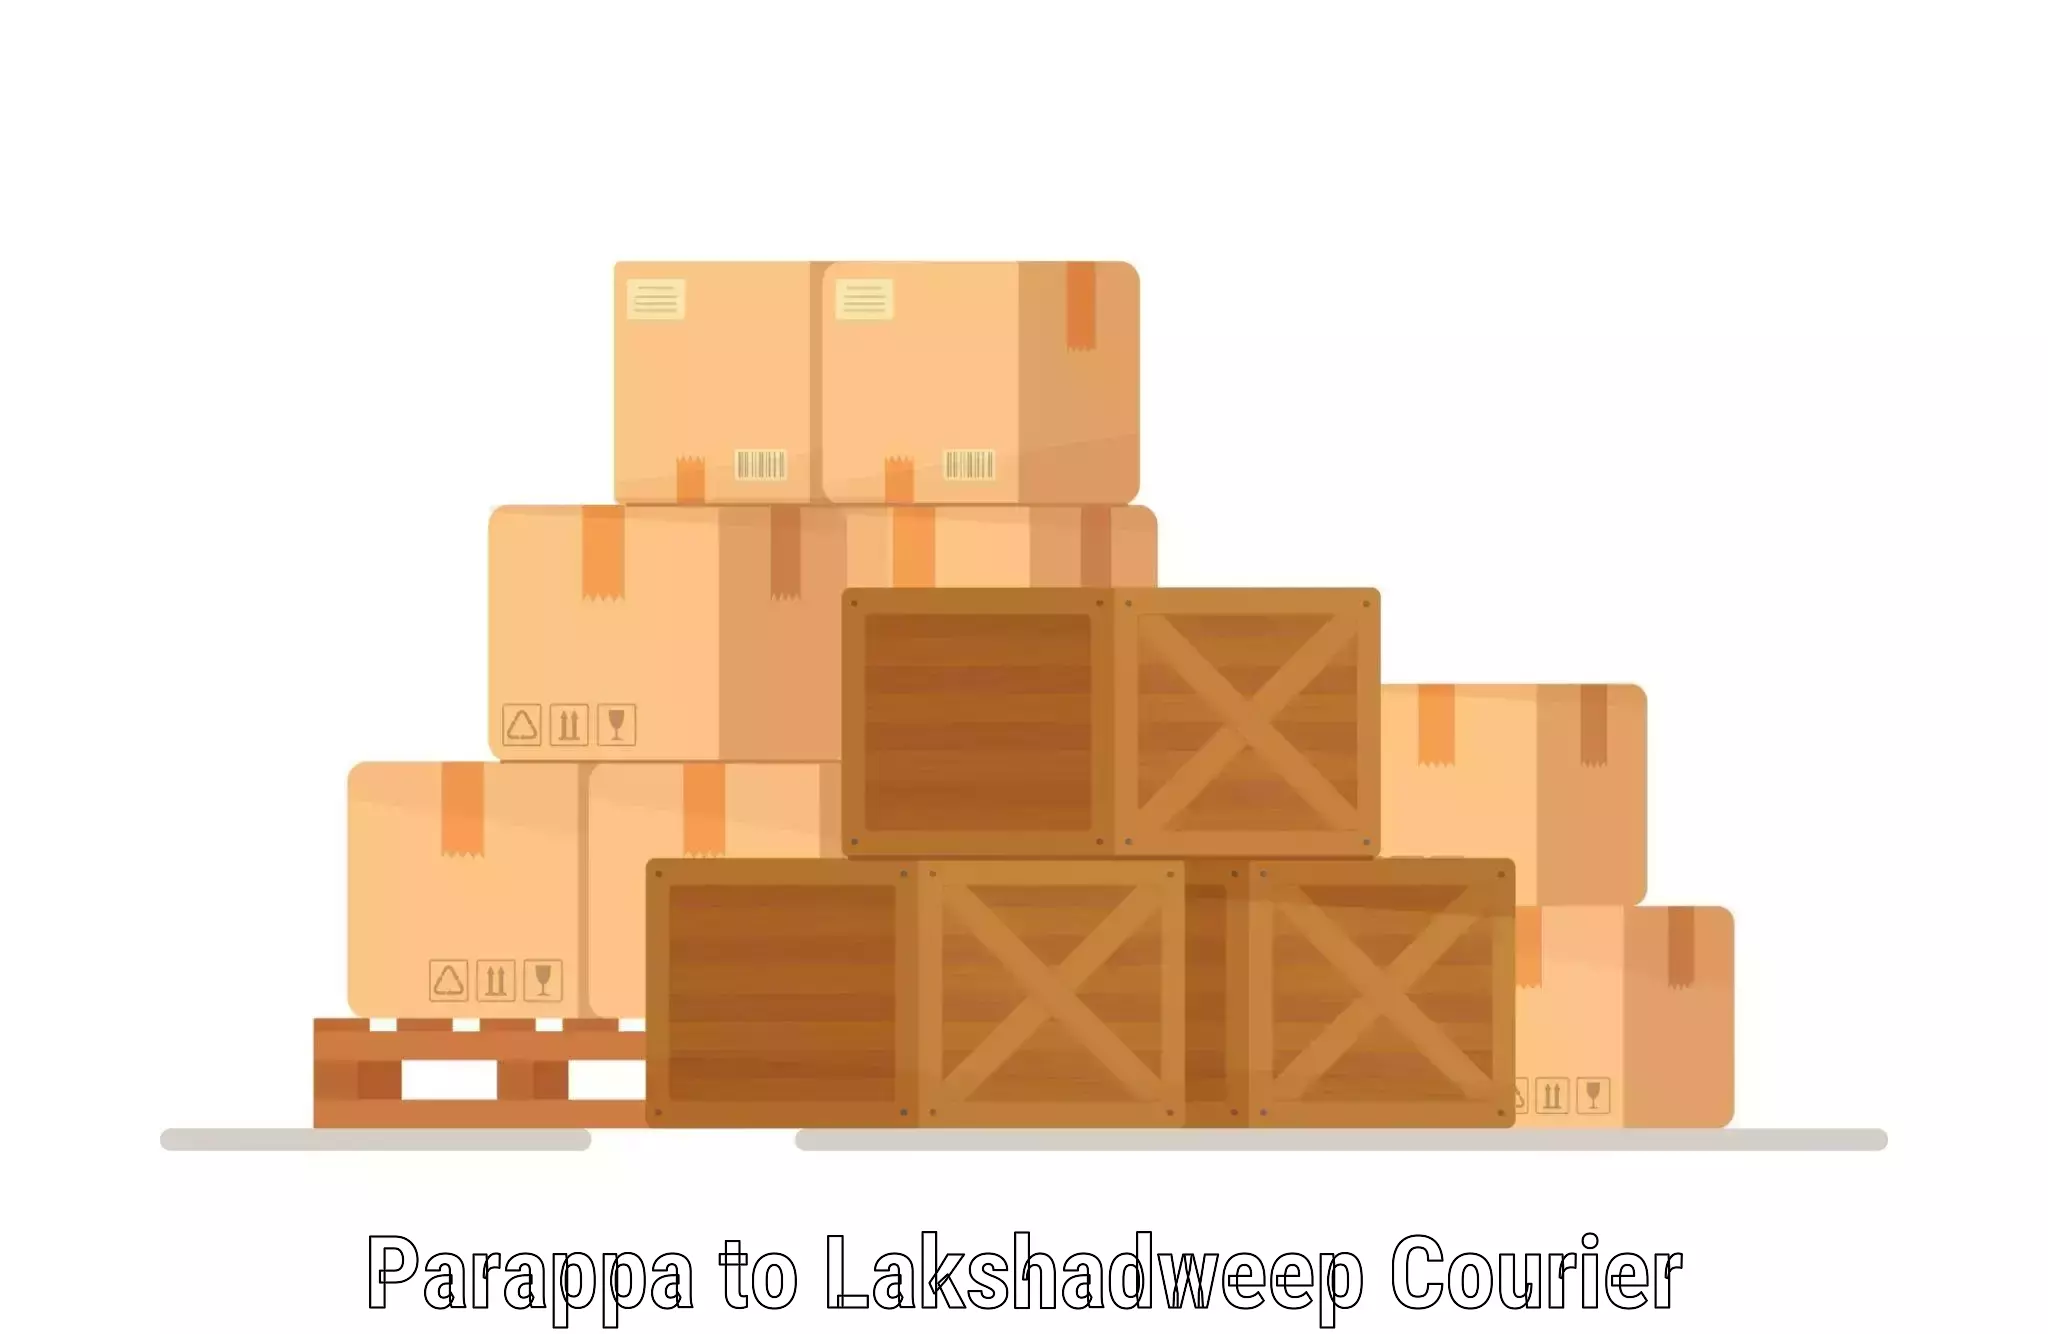 Ocean freight courier in Parappa to Lakshadweep